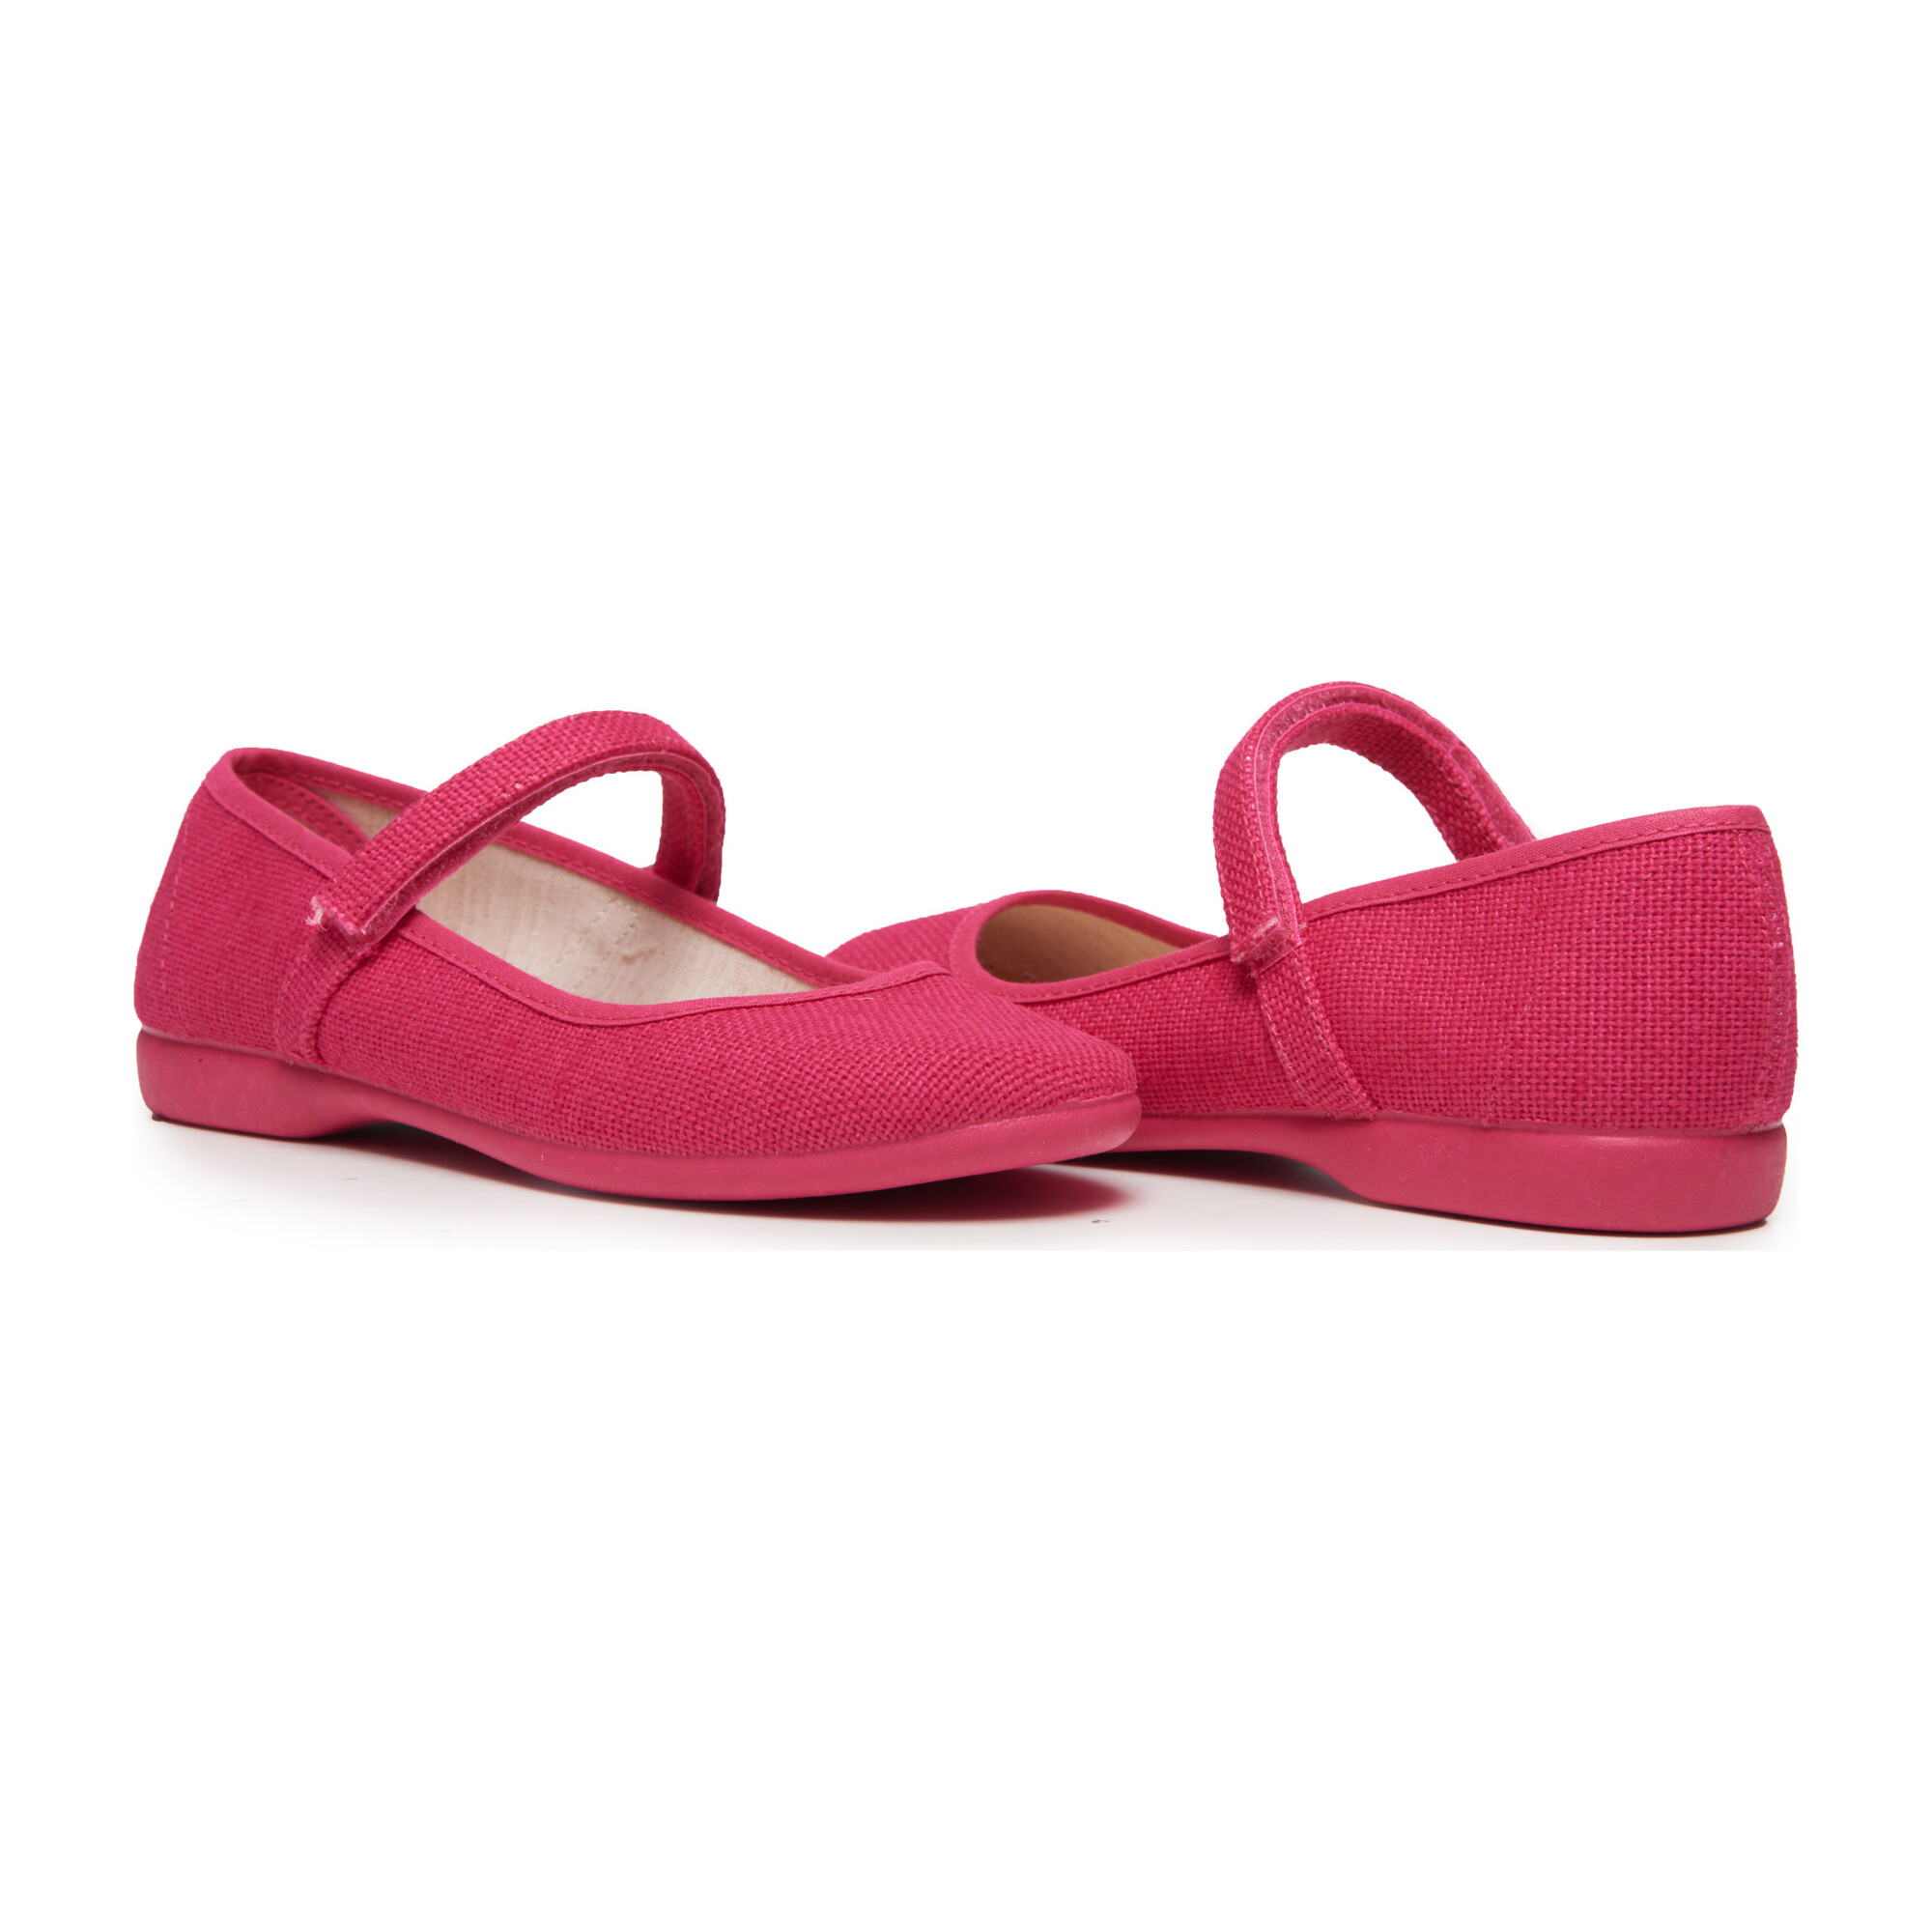 Canvas Mary Janes, Textured Fuschia - Kids Girl Accessories Shoes ...